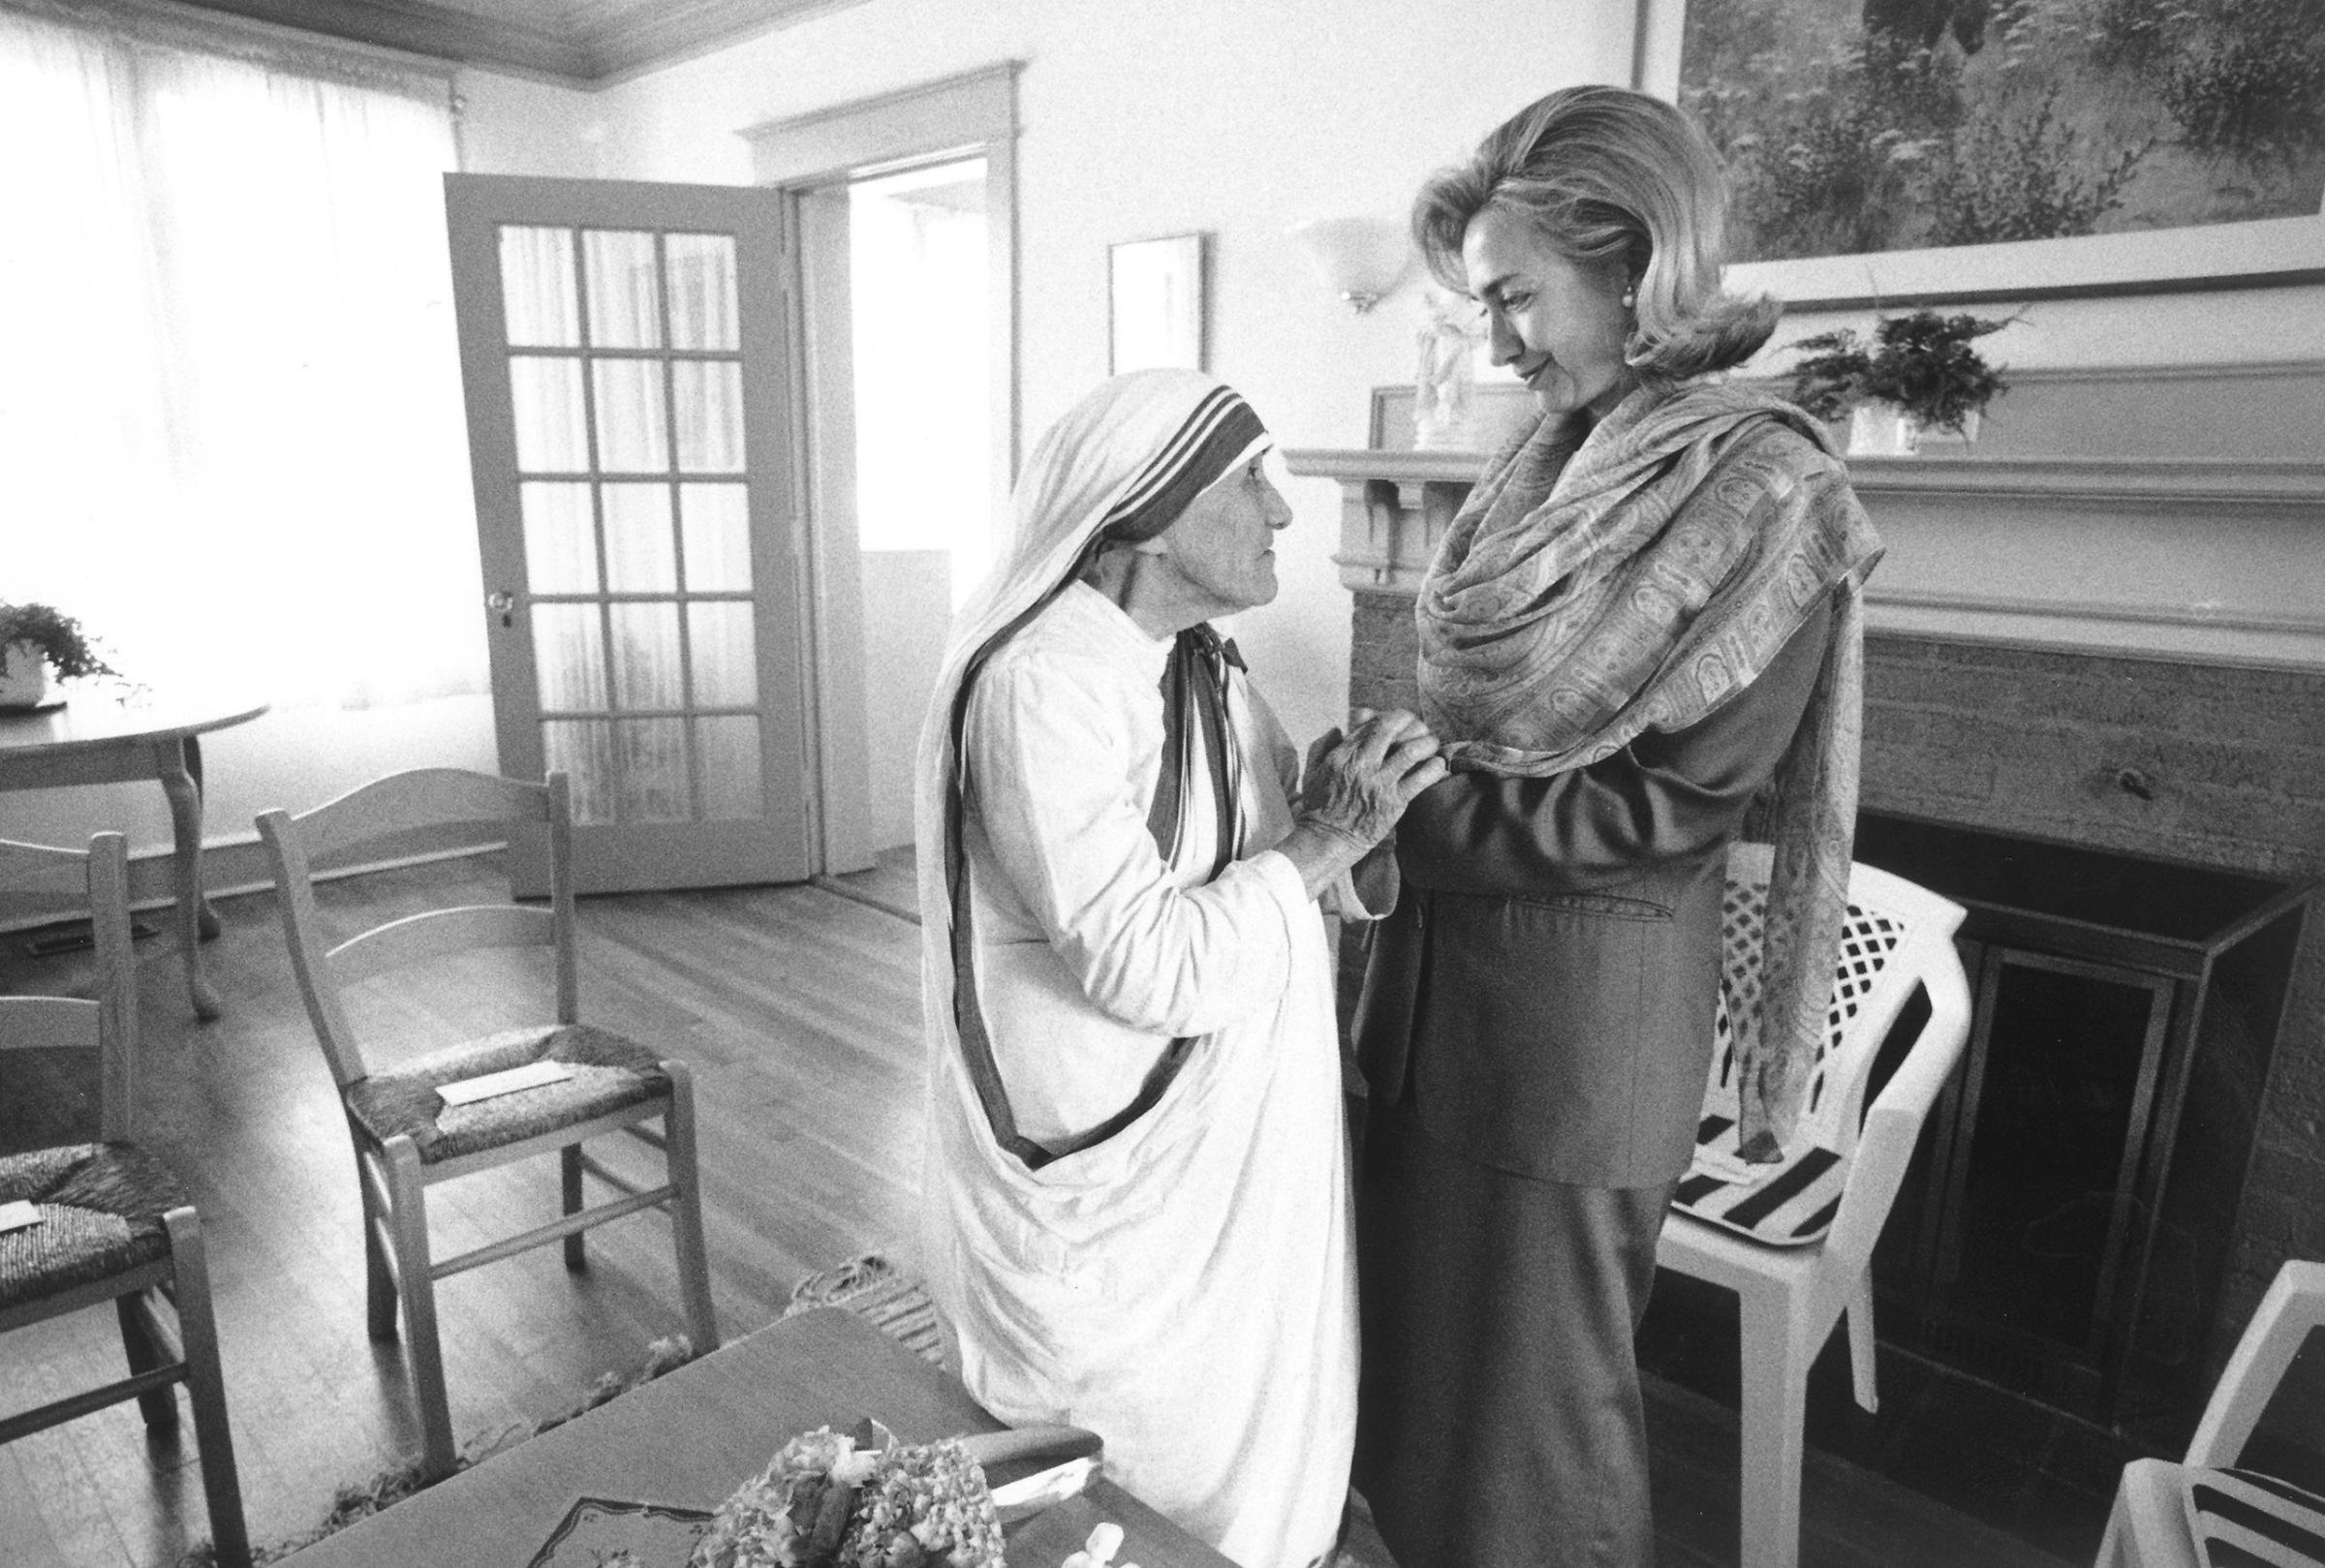 First Lady Hillary Rodham Clinton meets with Mother Teresa at the opening of the Mother Teresa Home for Infant Children in Washington, D.C., on June 19, 1995.